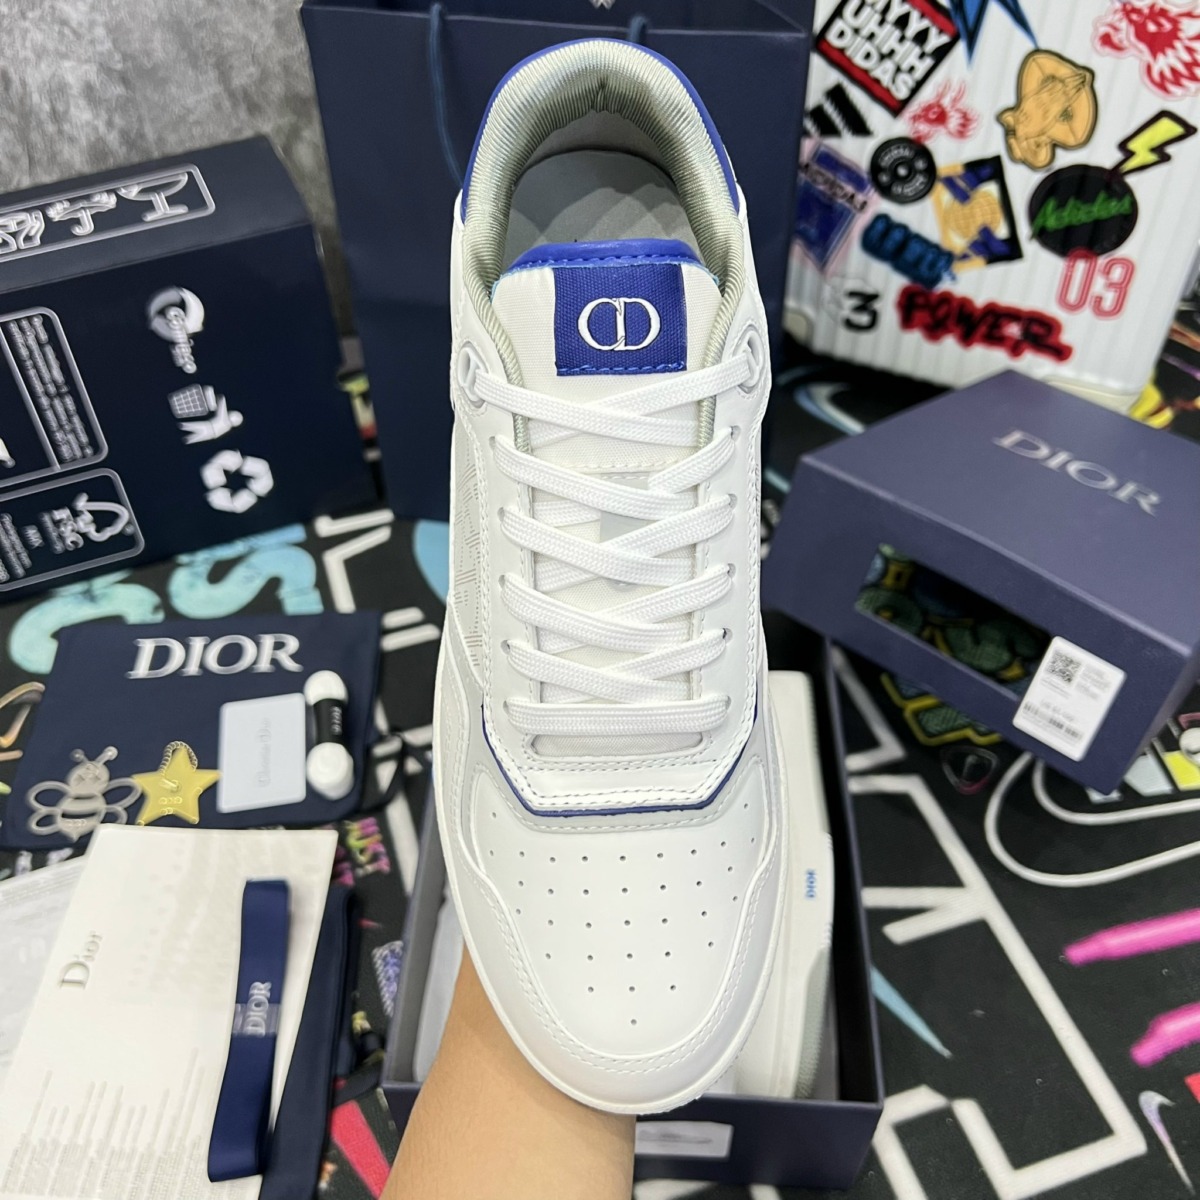 giay dior b27 low top sneaker blue white like auth 99 7